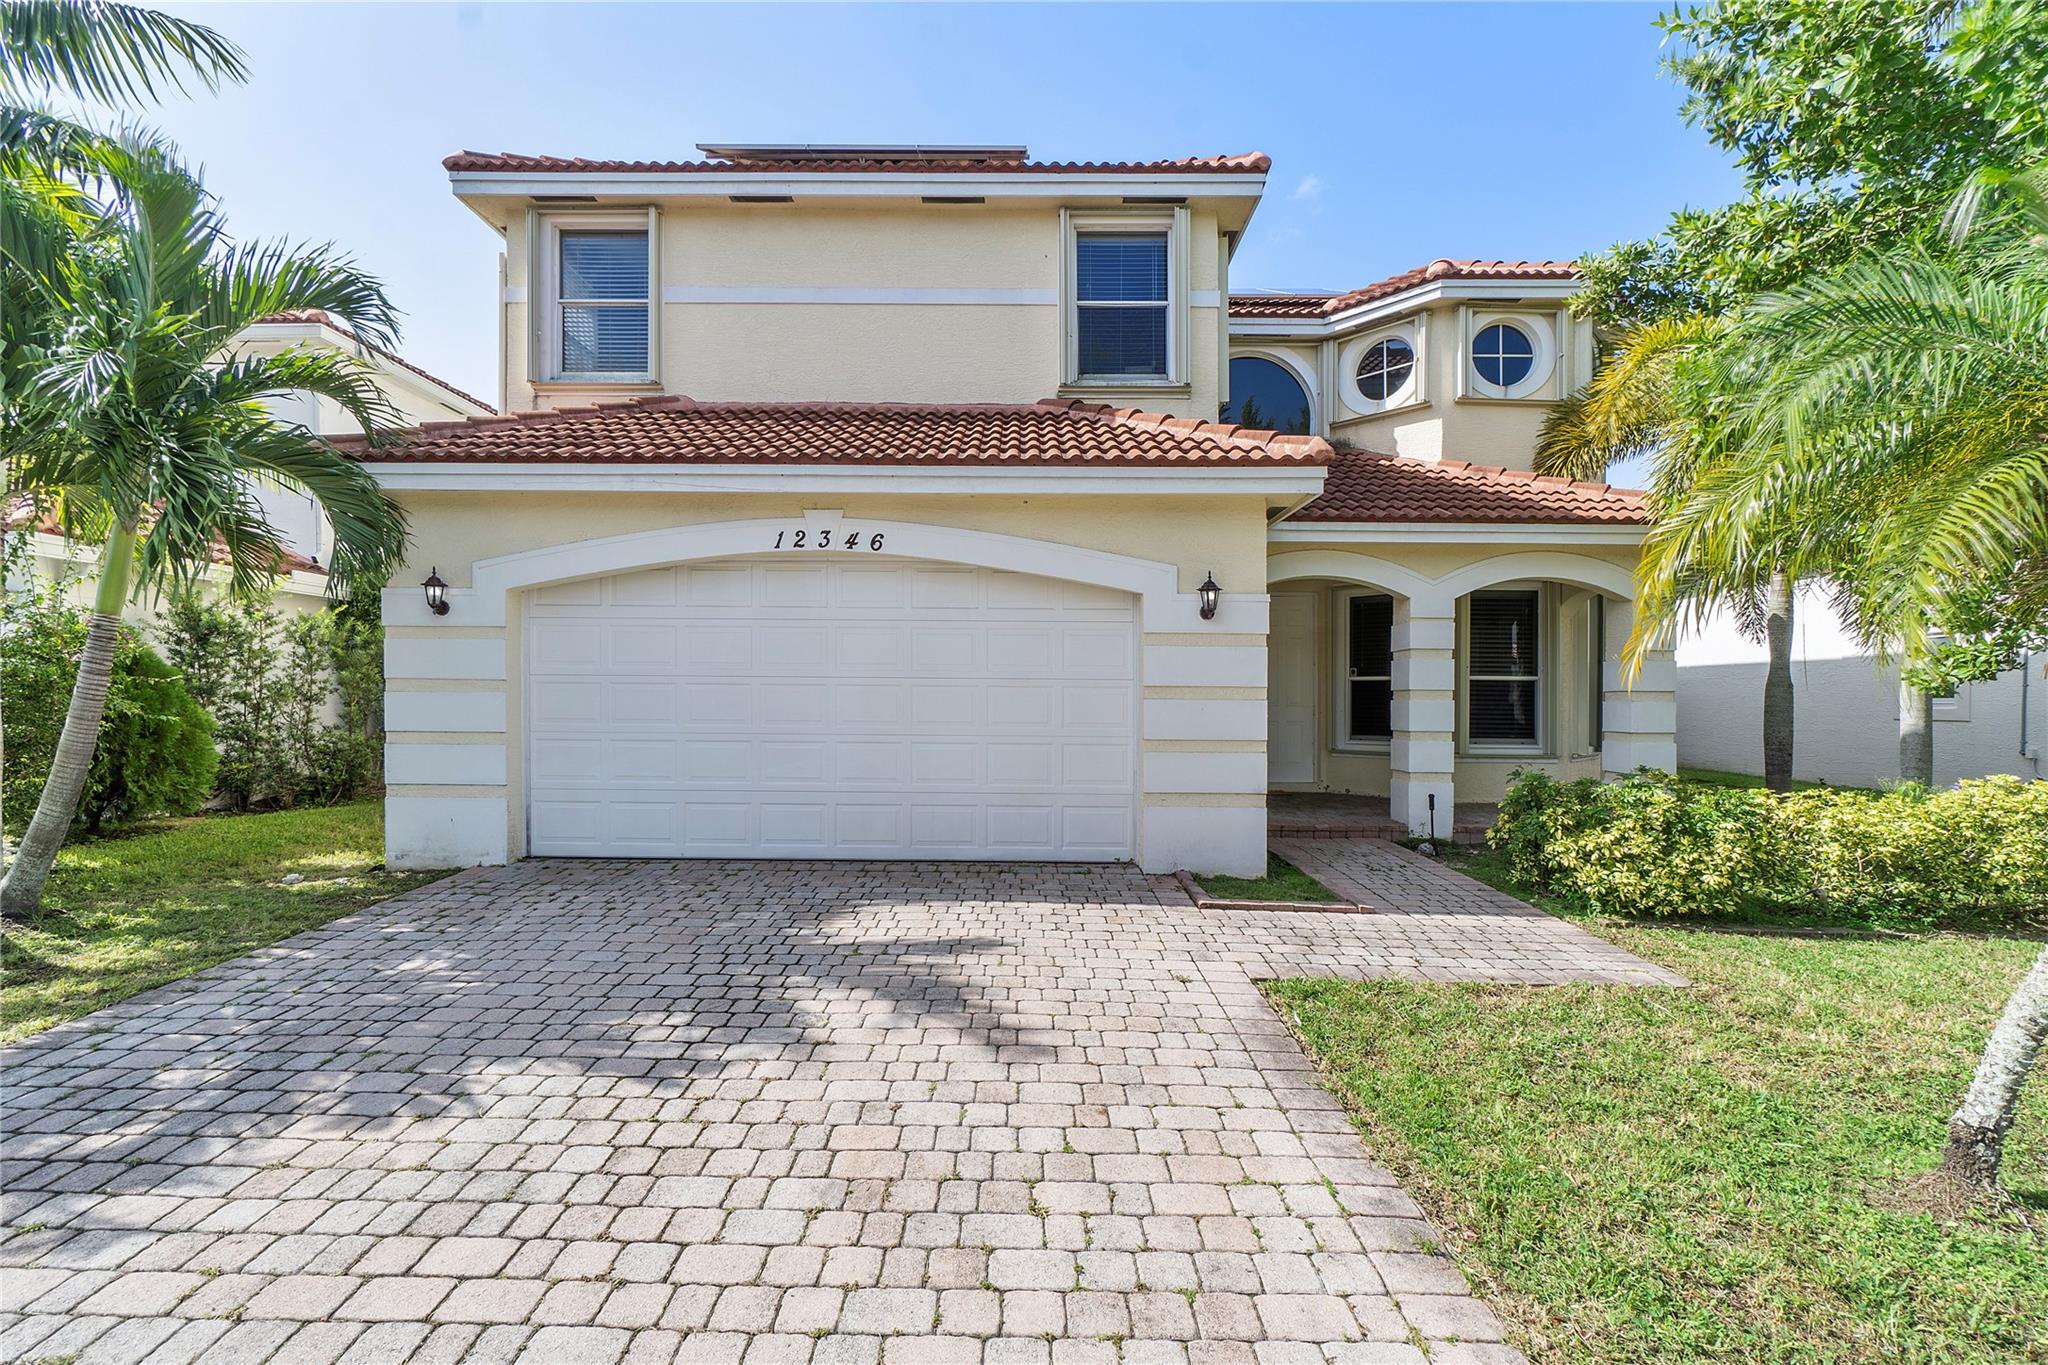 12346 NW 25th St, Coral Springs, FL 